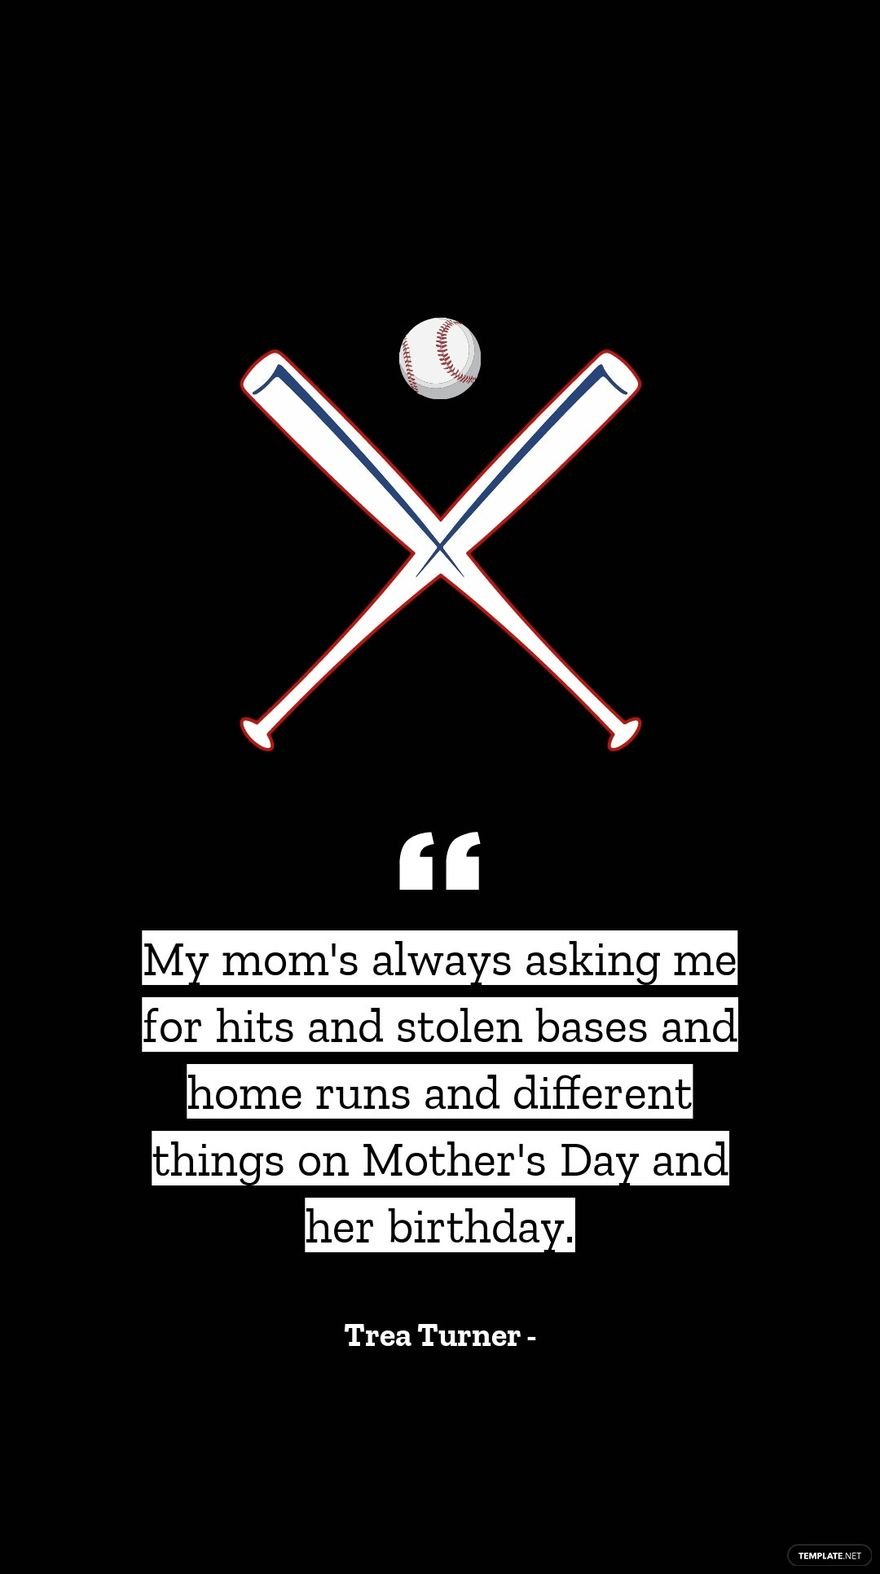 Trea Turner - My mom's always asking me for hits and stolen bases and home runs and different things on Mother's Day and her birthday.